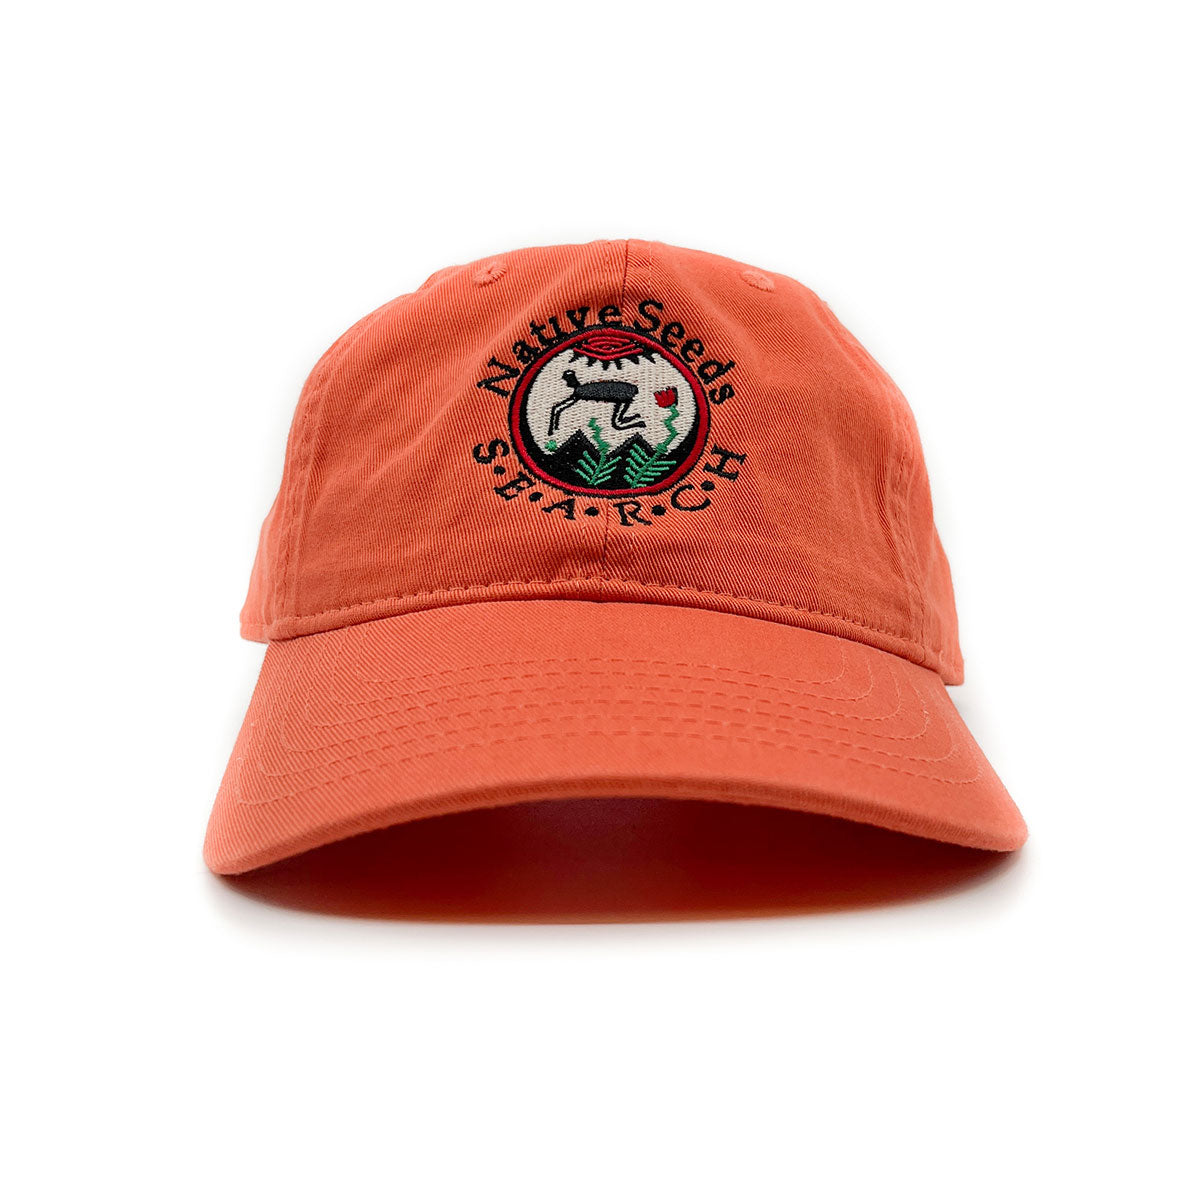 native seeds search logo baseball cap in terra cotta. 100% organic cotton cap with embroidered logo